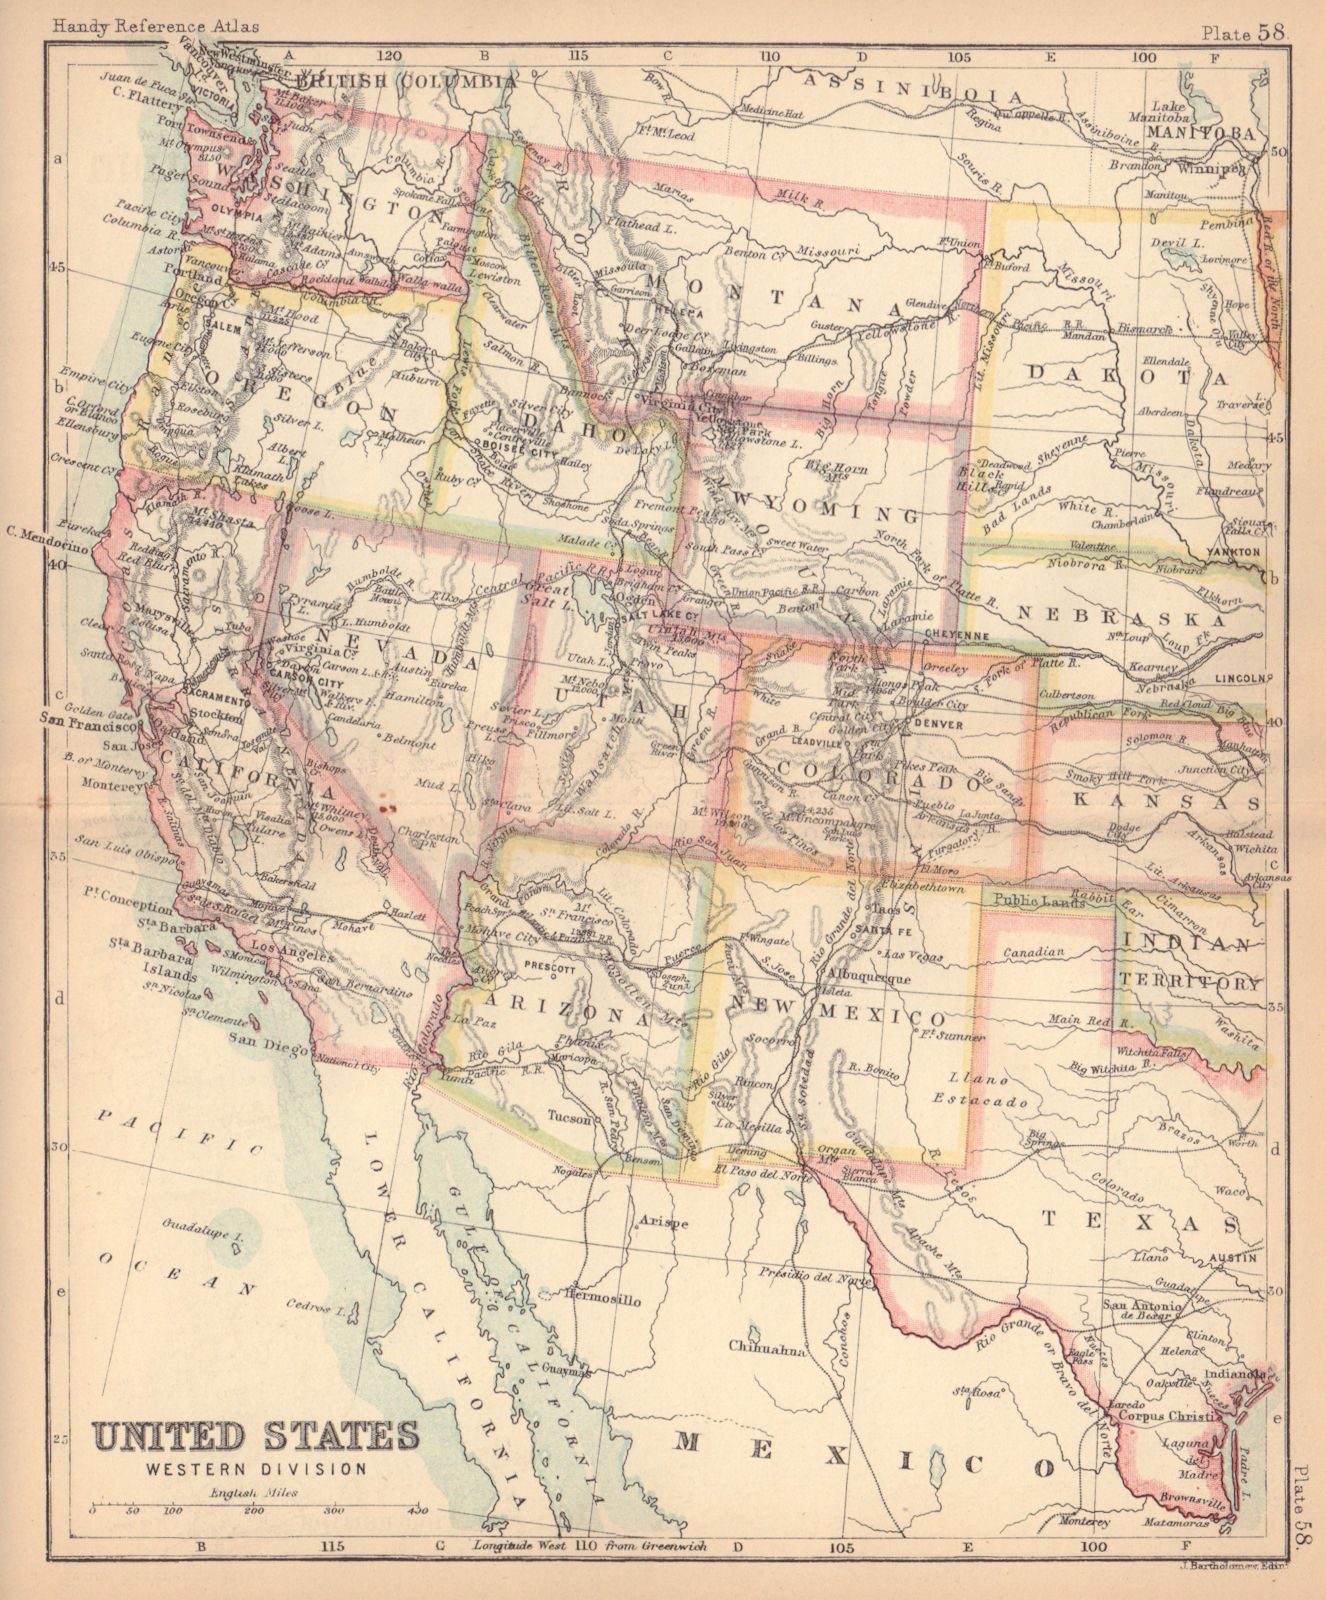 Associate Product United States Western Division. USA. BARTHOLOMEW 1888 old antique map chart